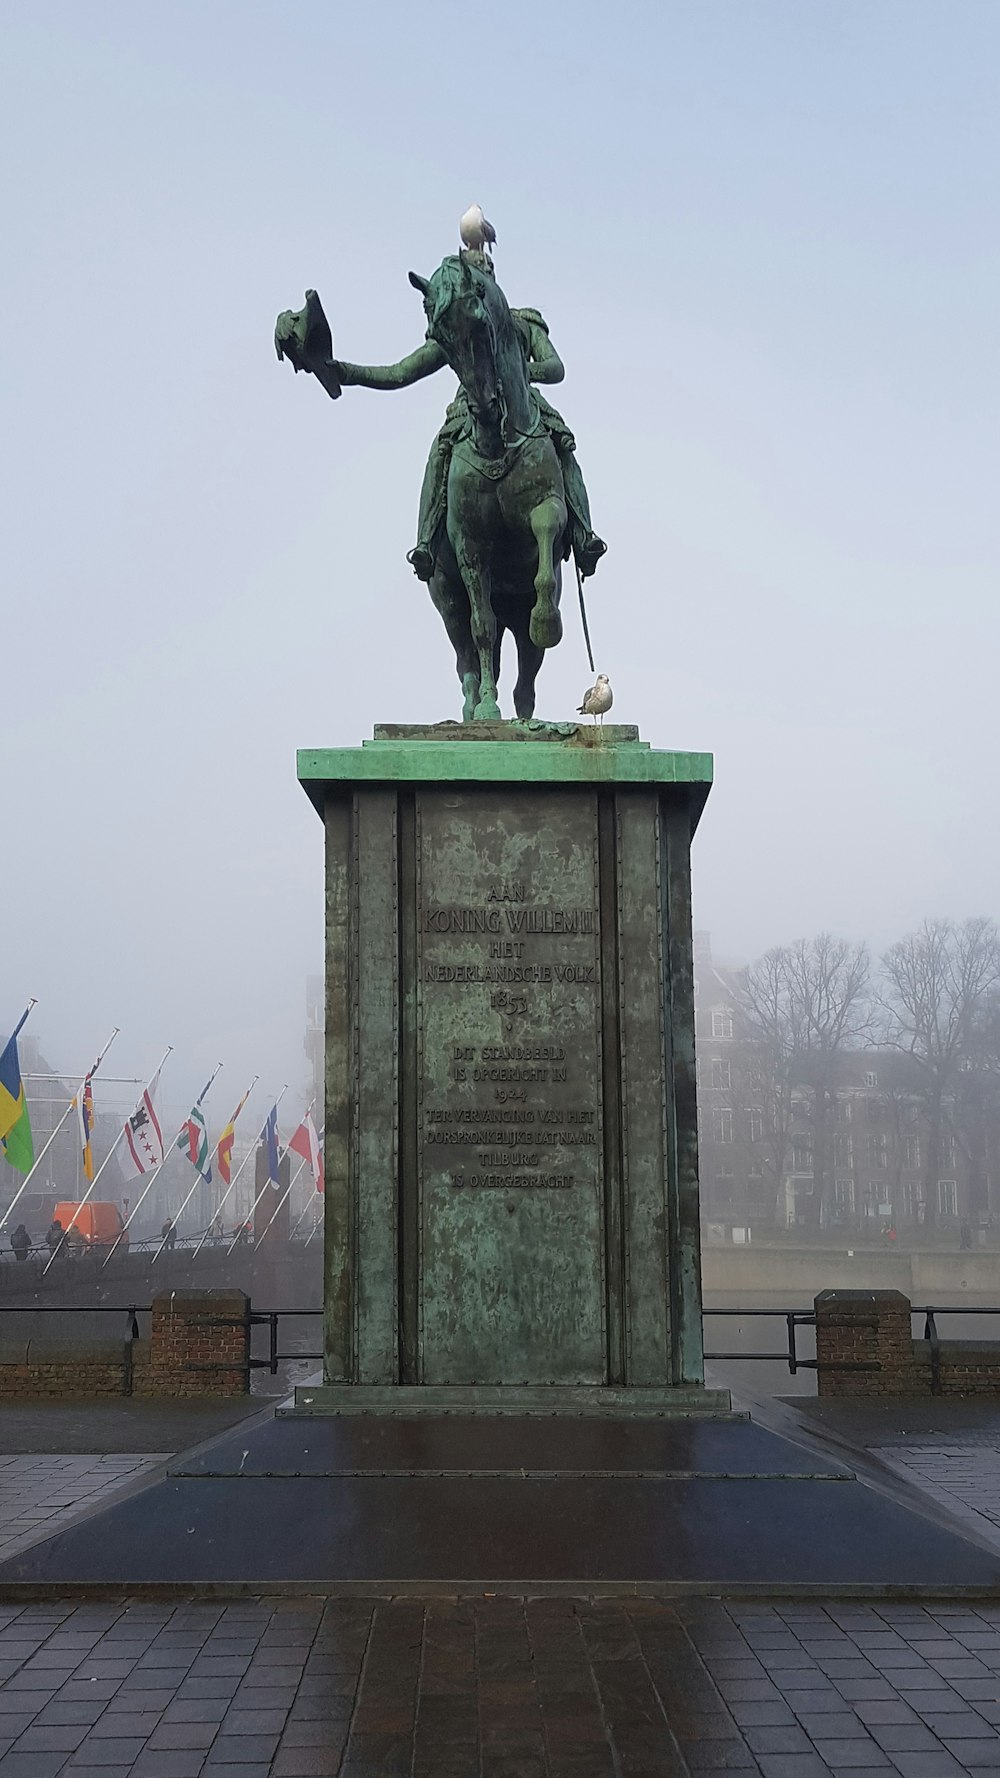 a statue of a man on a horse with flags in the background